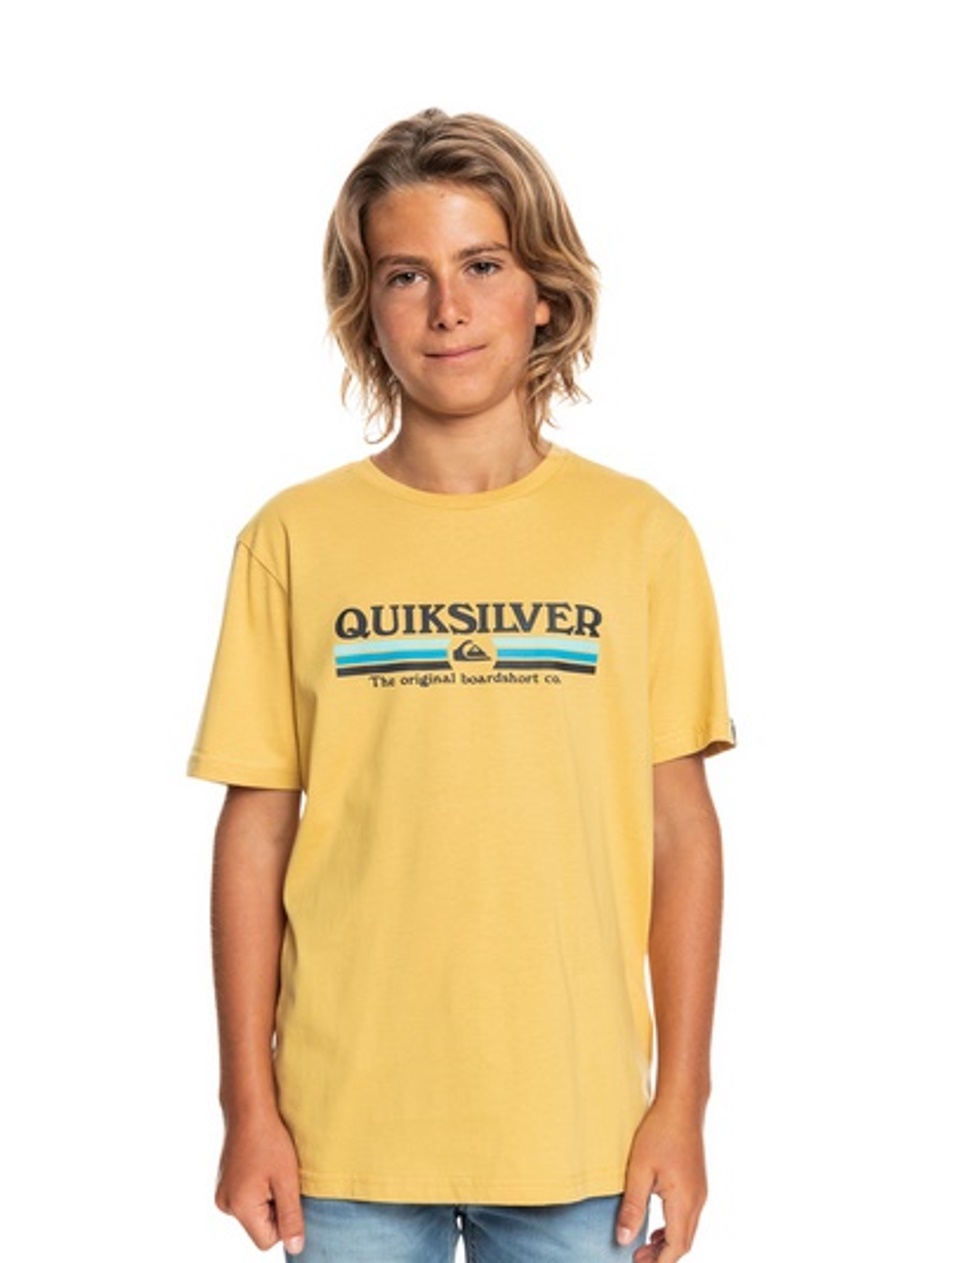 Quiksilver Kinder T-Shirt Lined Up gelb